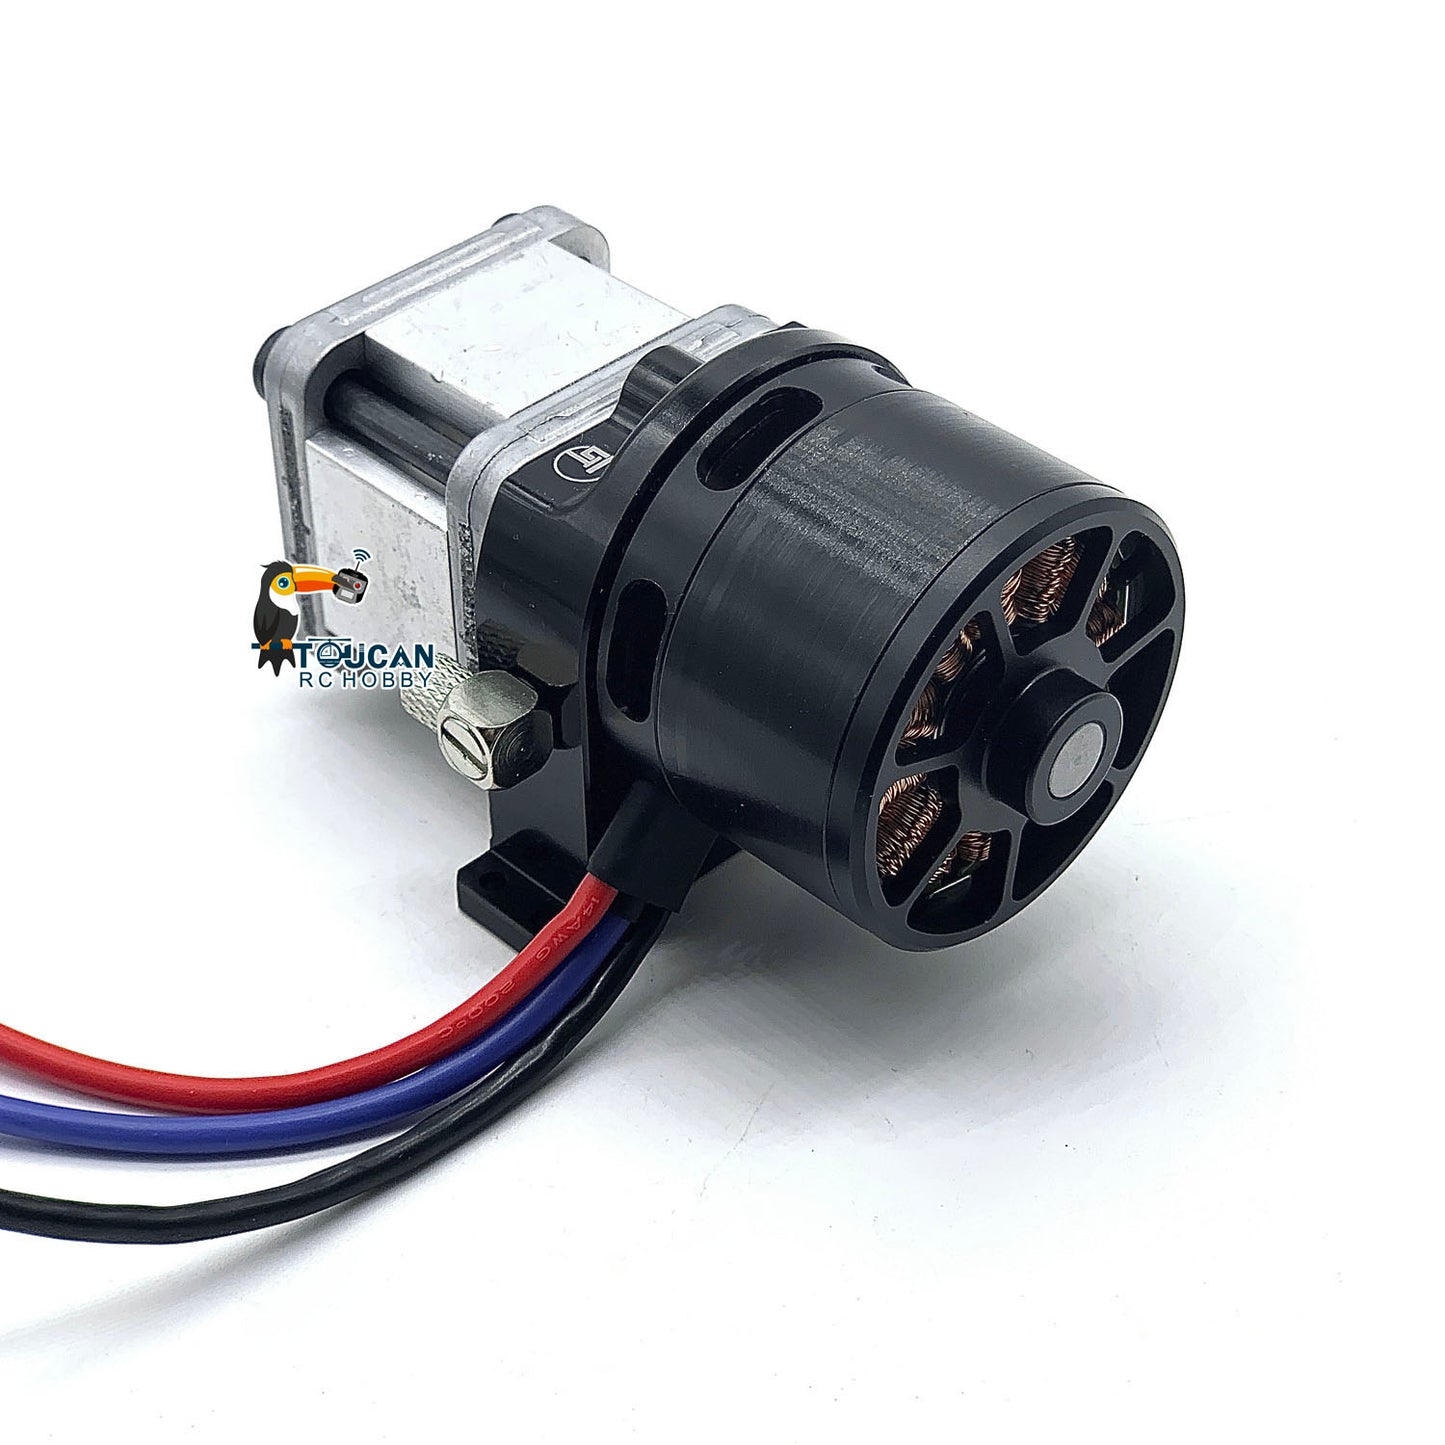 Metal Spare Part Hydraulic Pump Brushless 5055 Motor for 1/12 1/14 RC Excavator Cater Hydraulic Radio Control Construction Cars